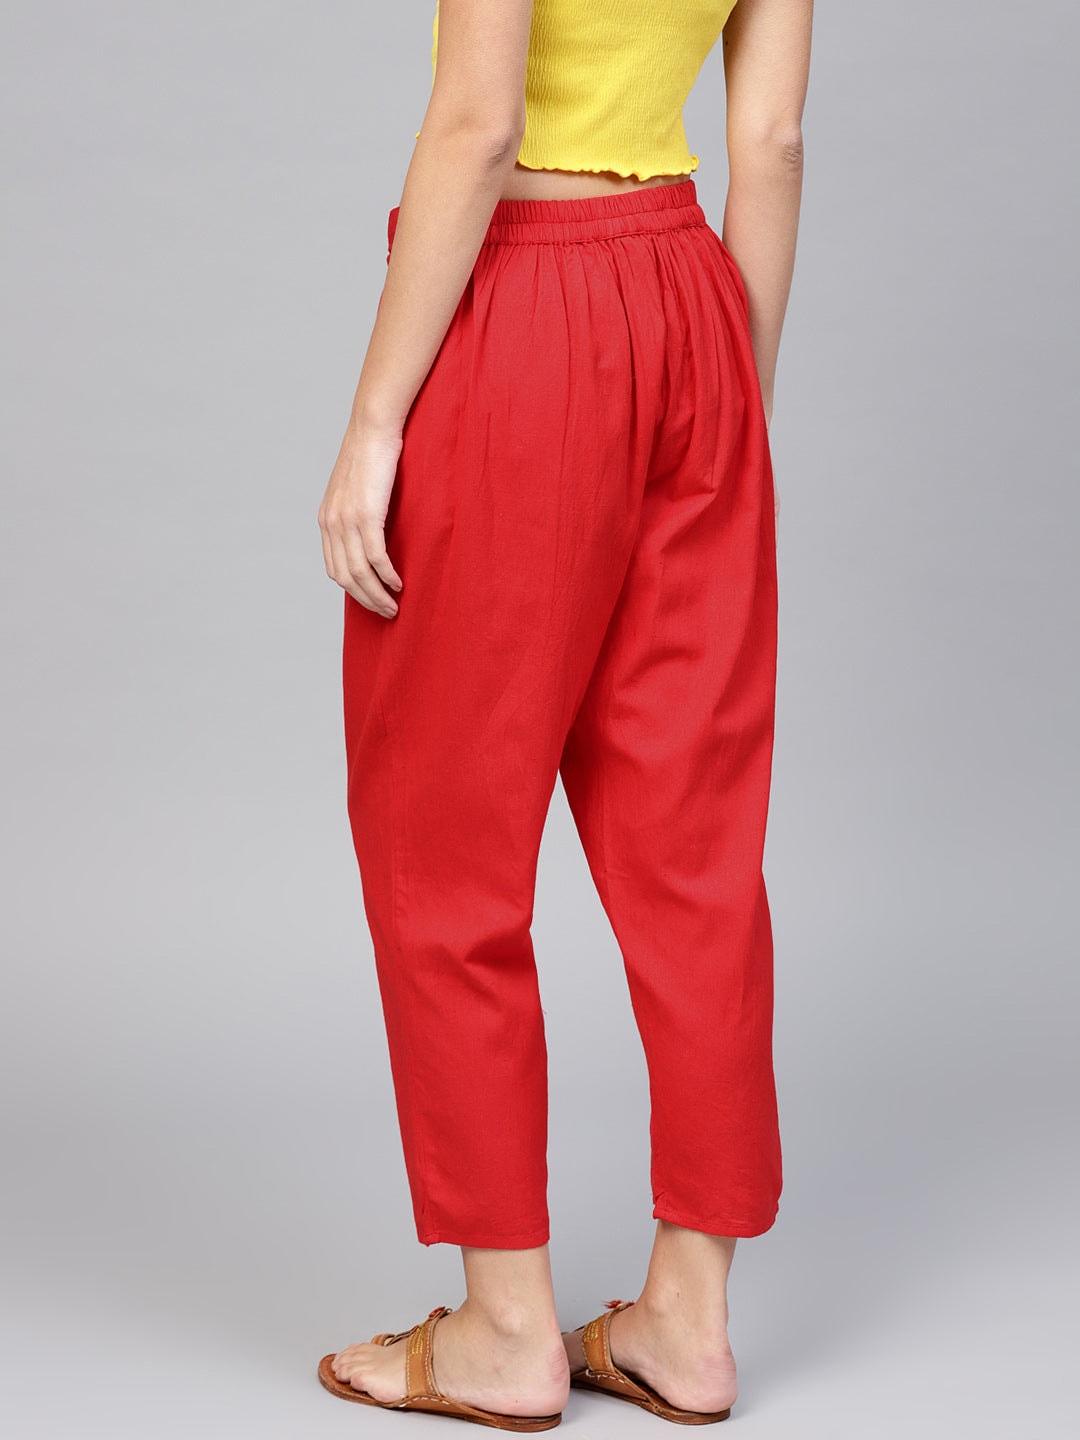 Red Solid Cotton Trousers